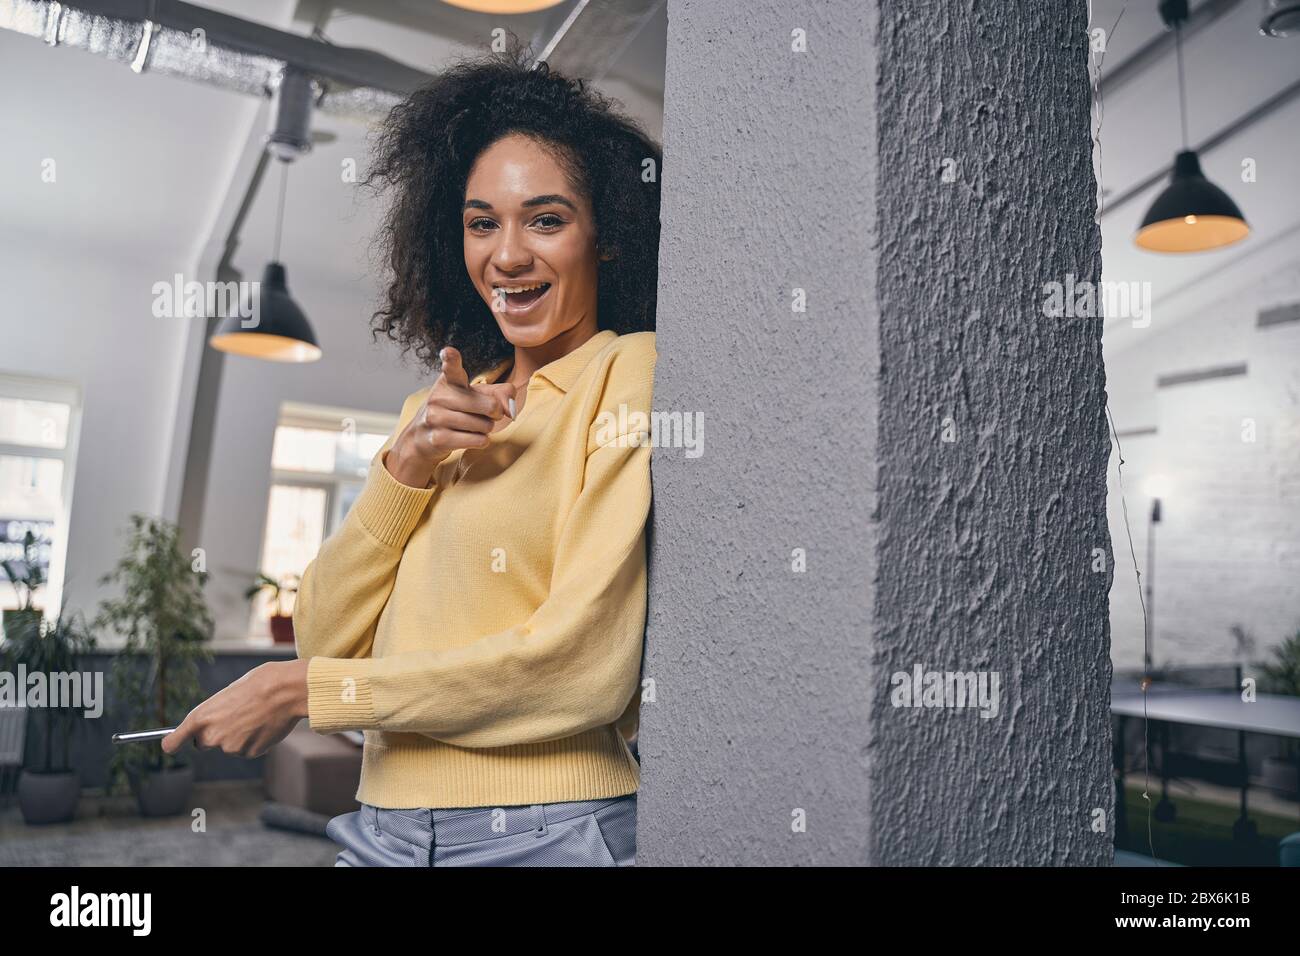 High-spirited lady pointing her finger at the camera Stock Photo